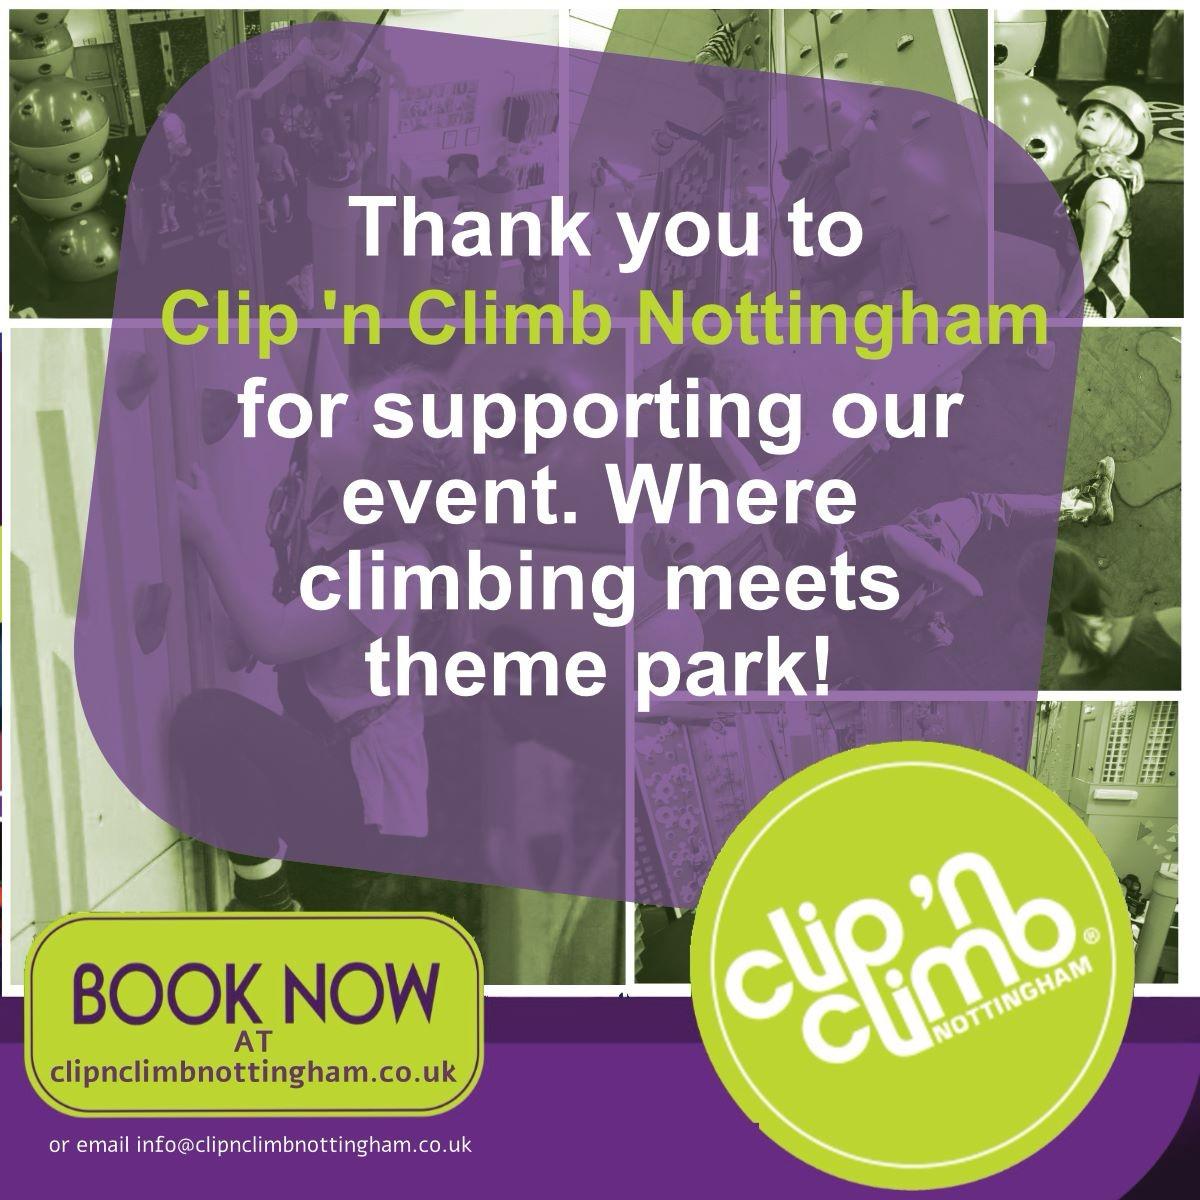 With thanks to Clip and climb for their recent support and donation to our Wonka golden ticket event